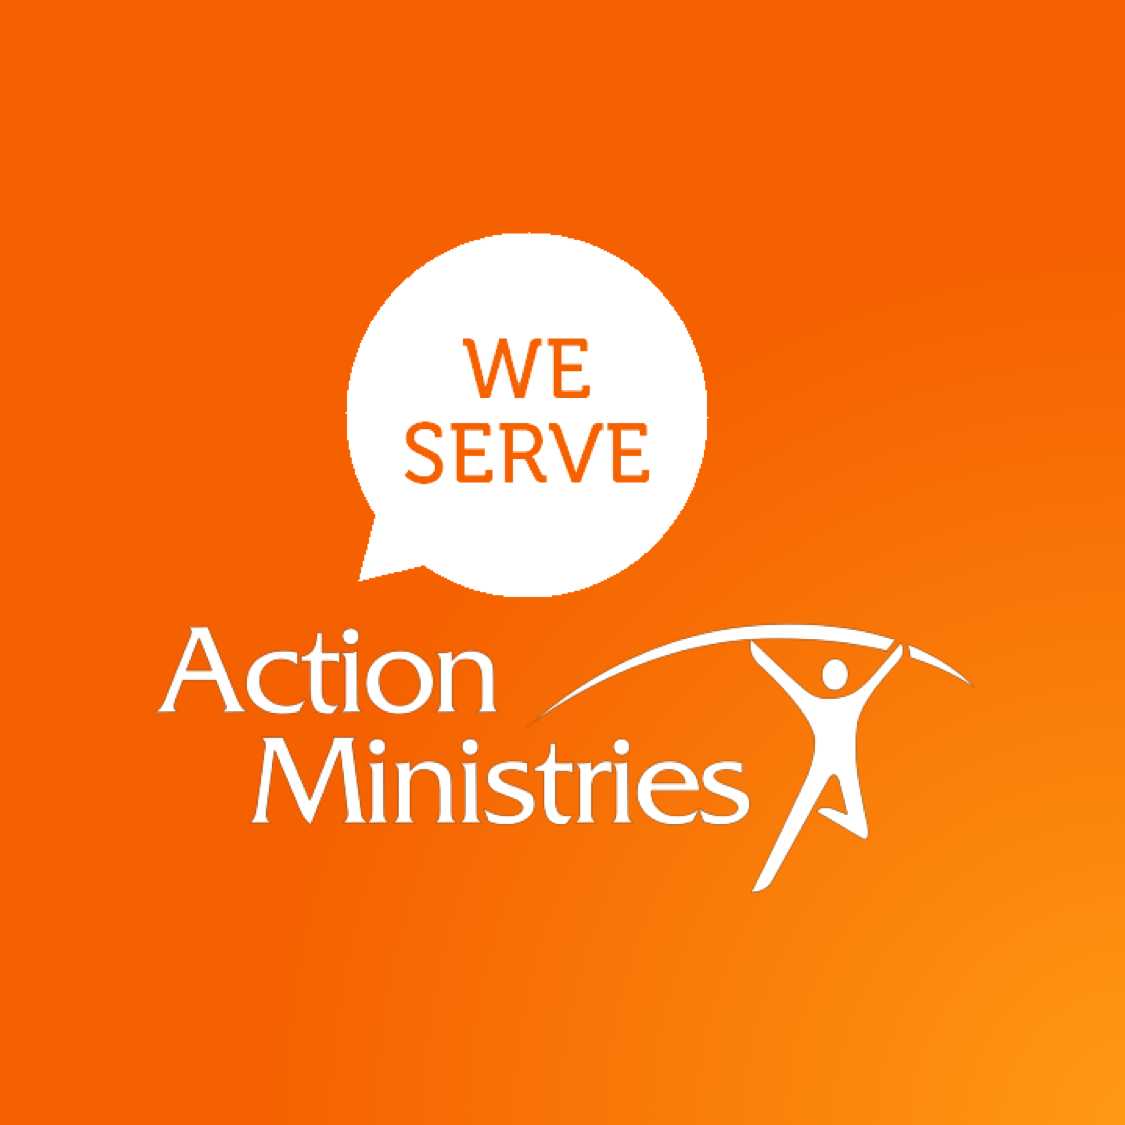 Action Ministries Arch Experience at Trinity Assessment Center (TAC)